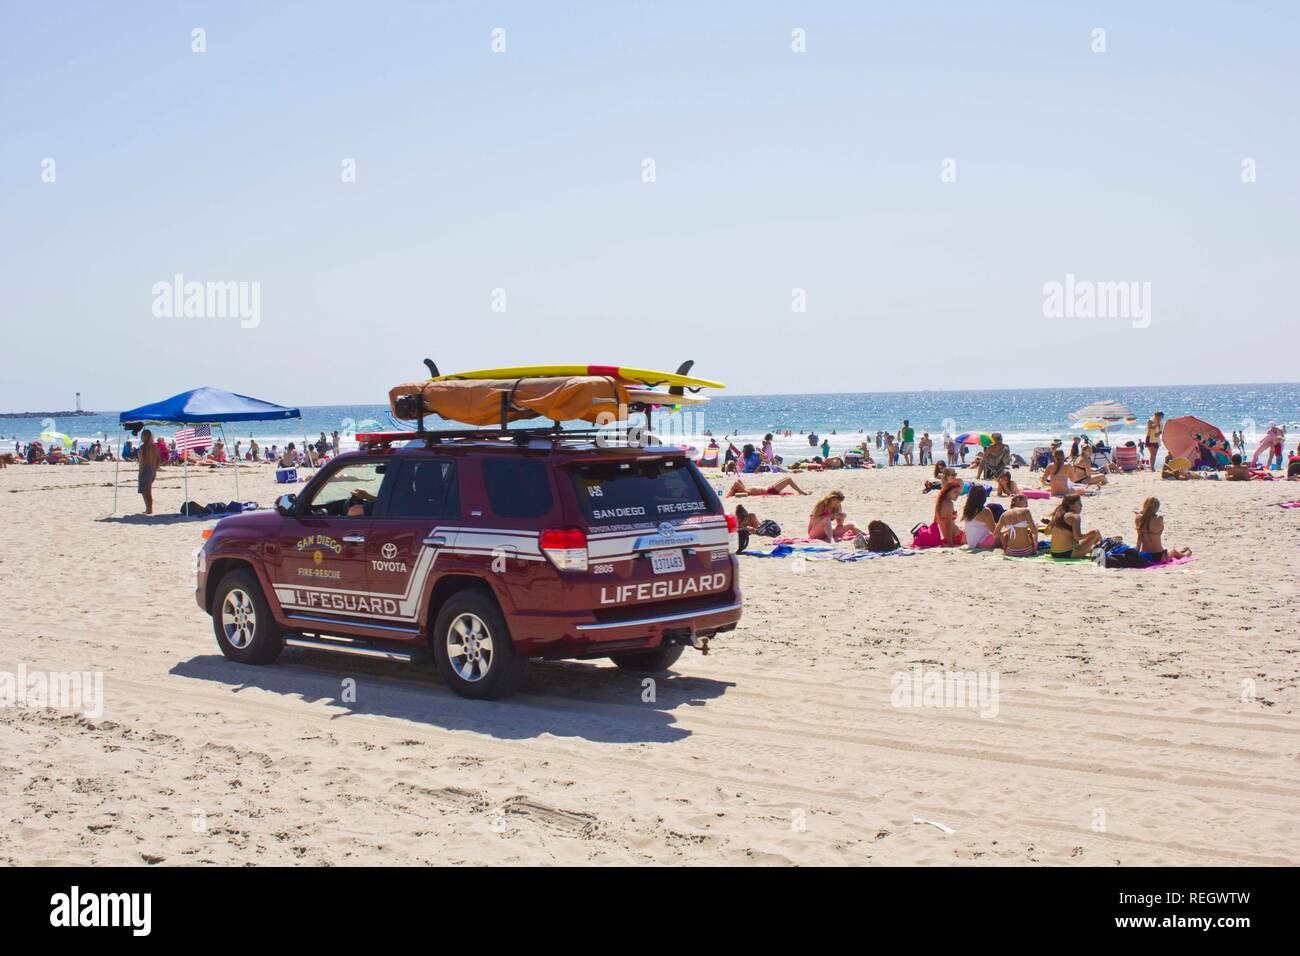 SAN DIEGO, USA - AUGUST 22 2013: Lifeguard vehicle on Mission Bay Beach with people in San Diego, California Stock Photo